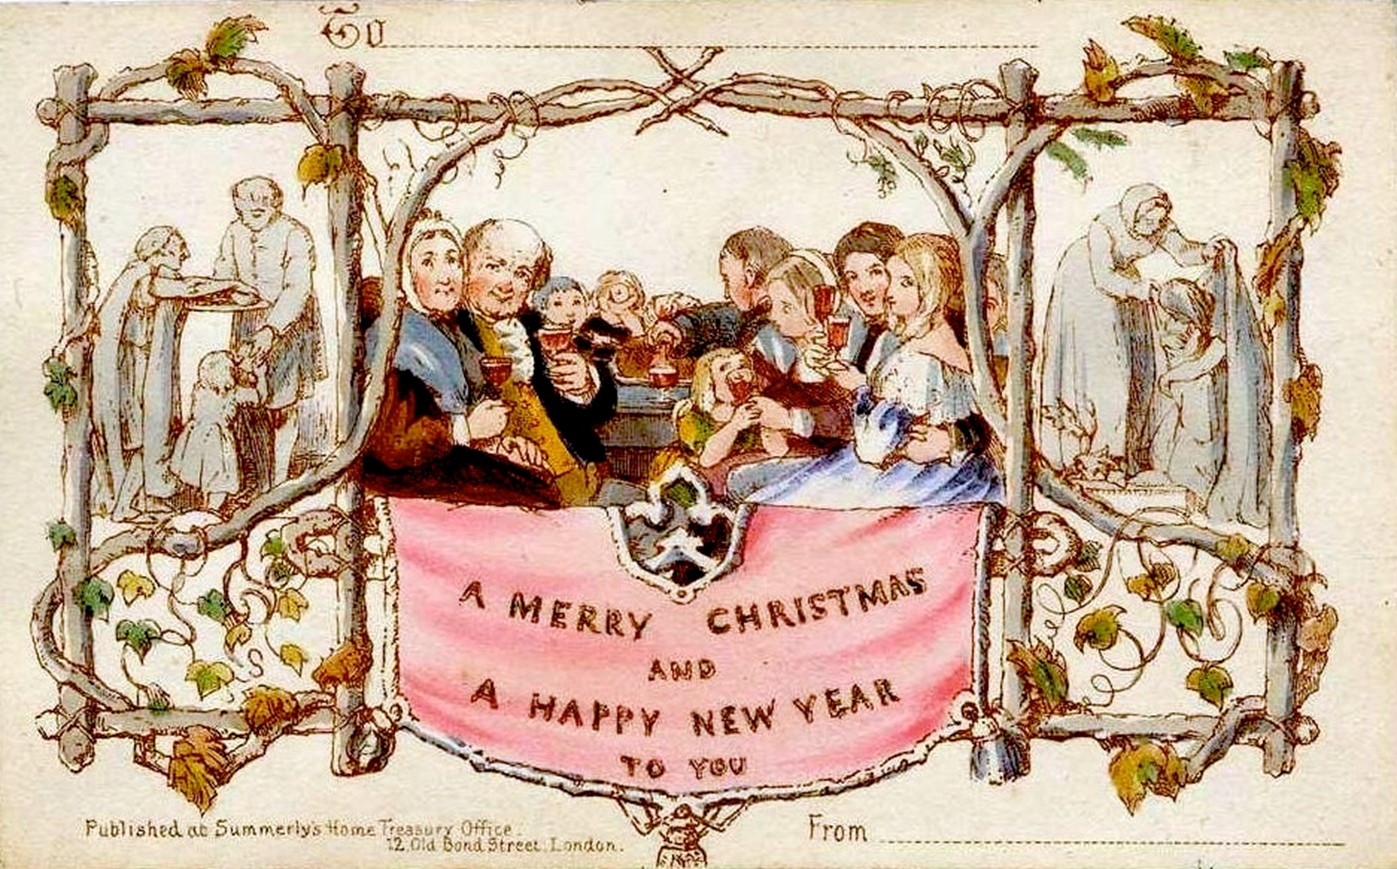 The first Christmas card was commissioned by Sir Henry Cole and illustrated by John Callcott Horsley in London on May 1, 1843. Since that time, people across the globe have been sending and receiving Christmas cards as part of the Christmas season. This tradition of sending cards has always been a way of communicating with family and friends. Many people write messages in their cards or send photographs.